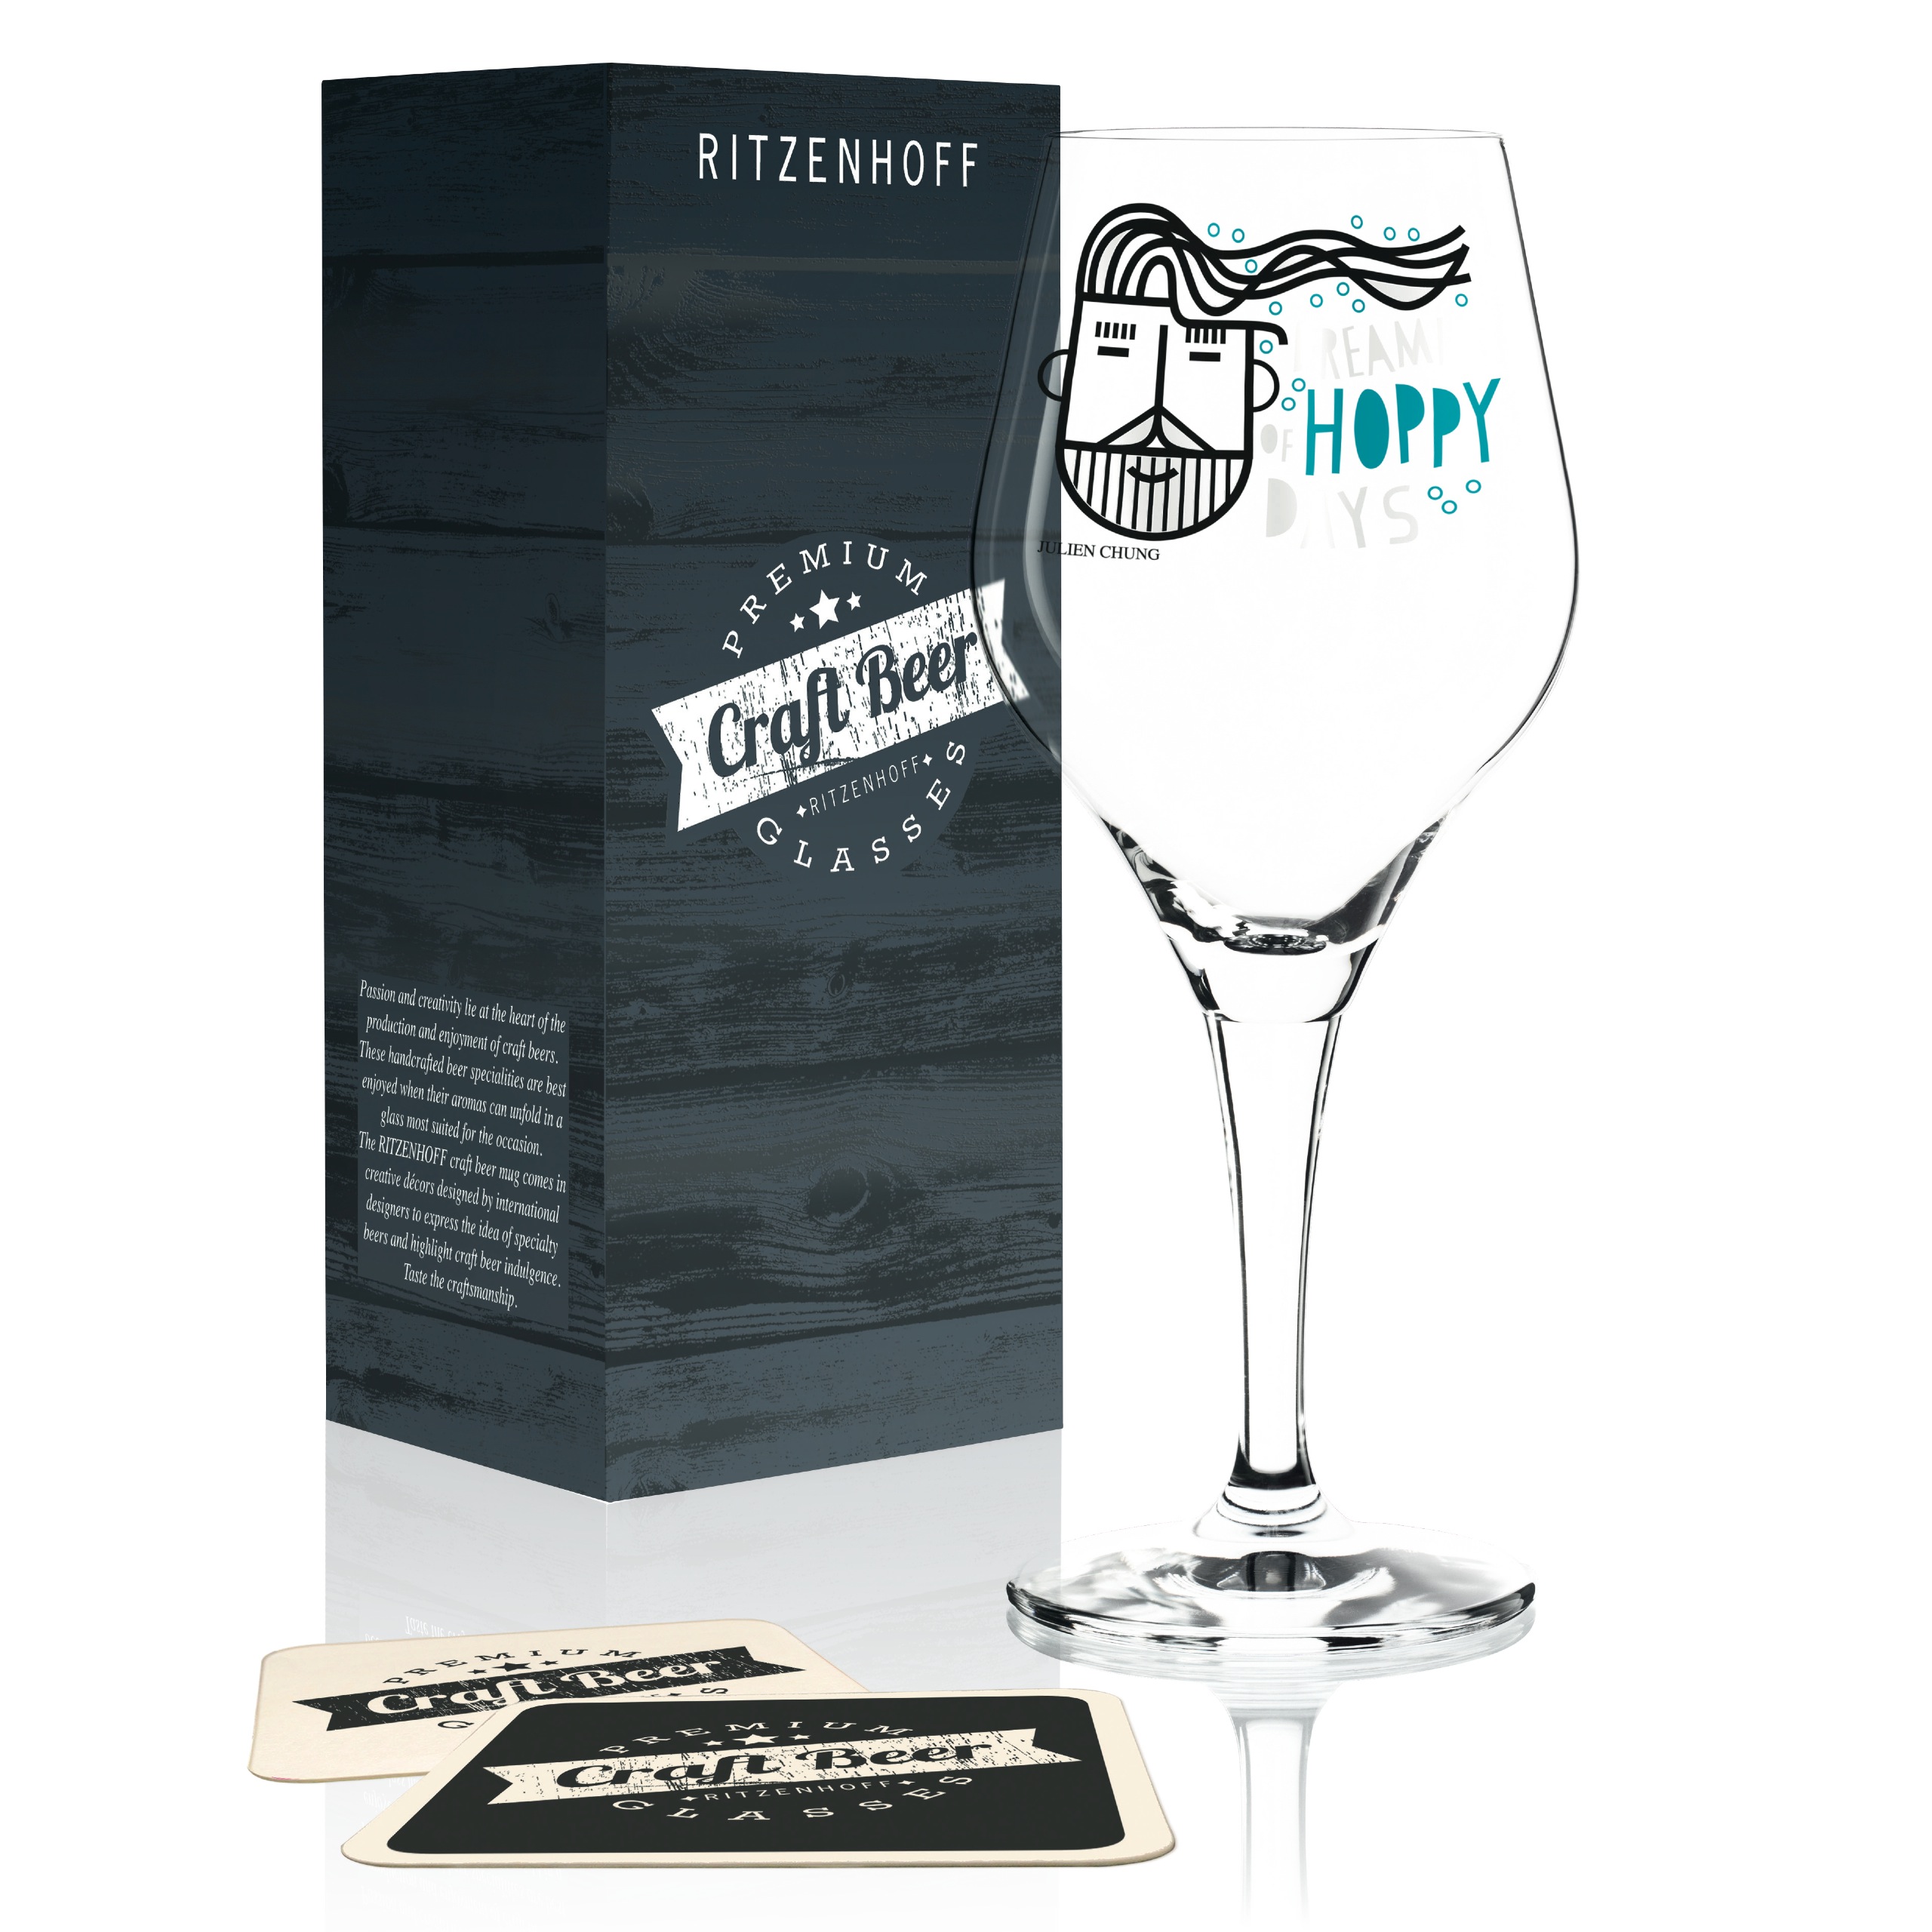 beer Craft J. 2018 Box by glass Direct Craft – Ritzenhoff Chung Beer